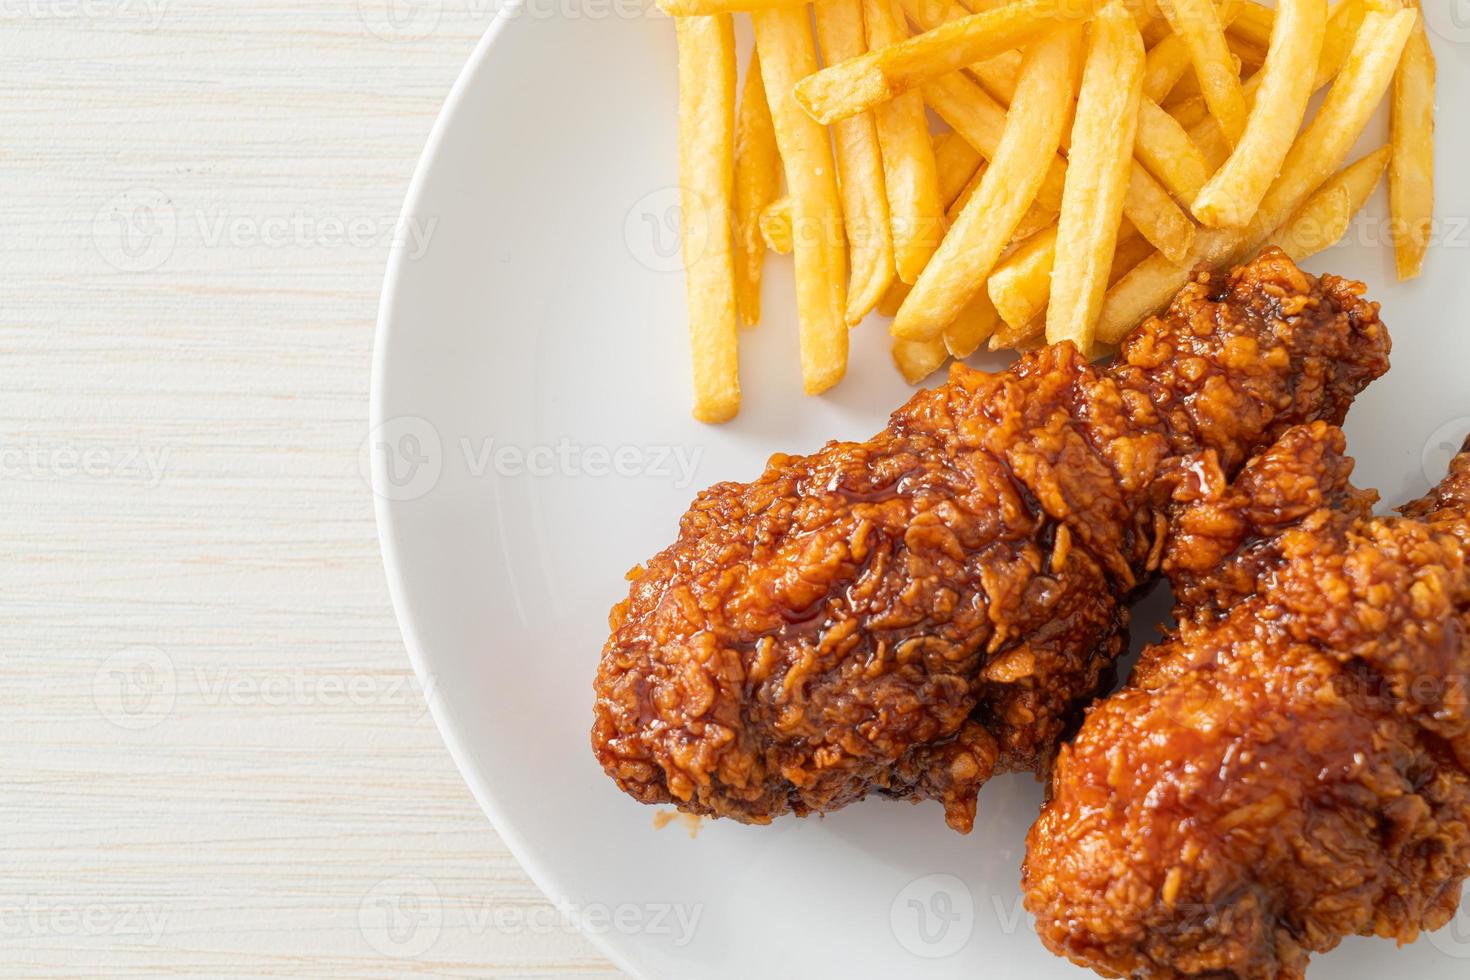 Spicy Korean fried chicken with fries photo